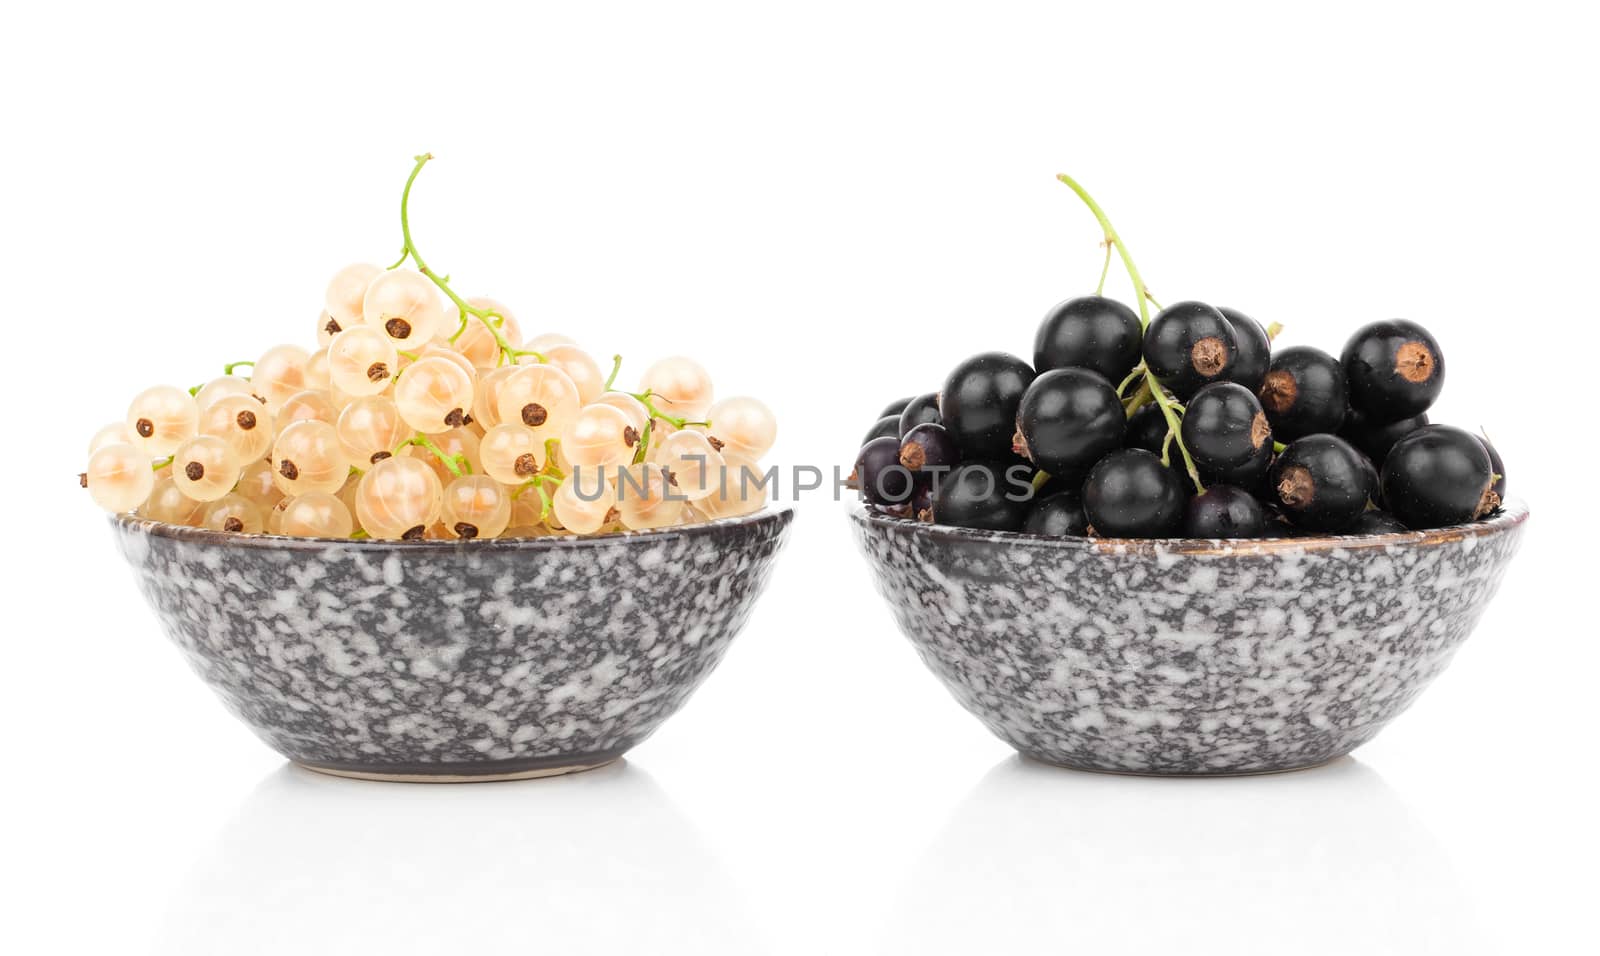 white and black currant in a bowl, on a white background
 by motorolka